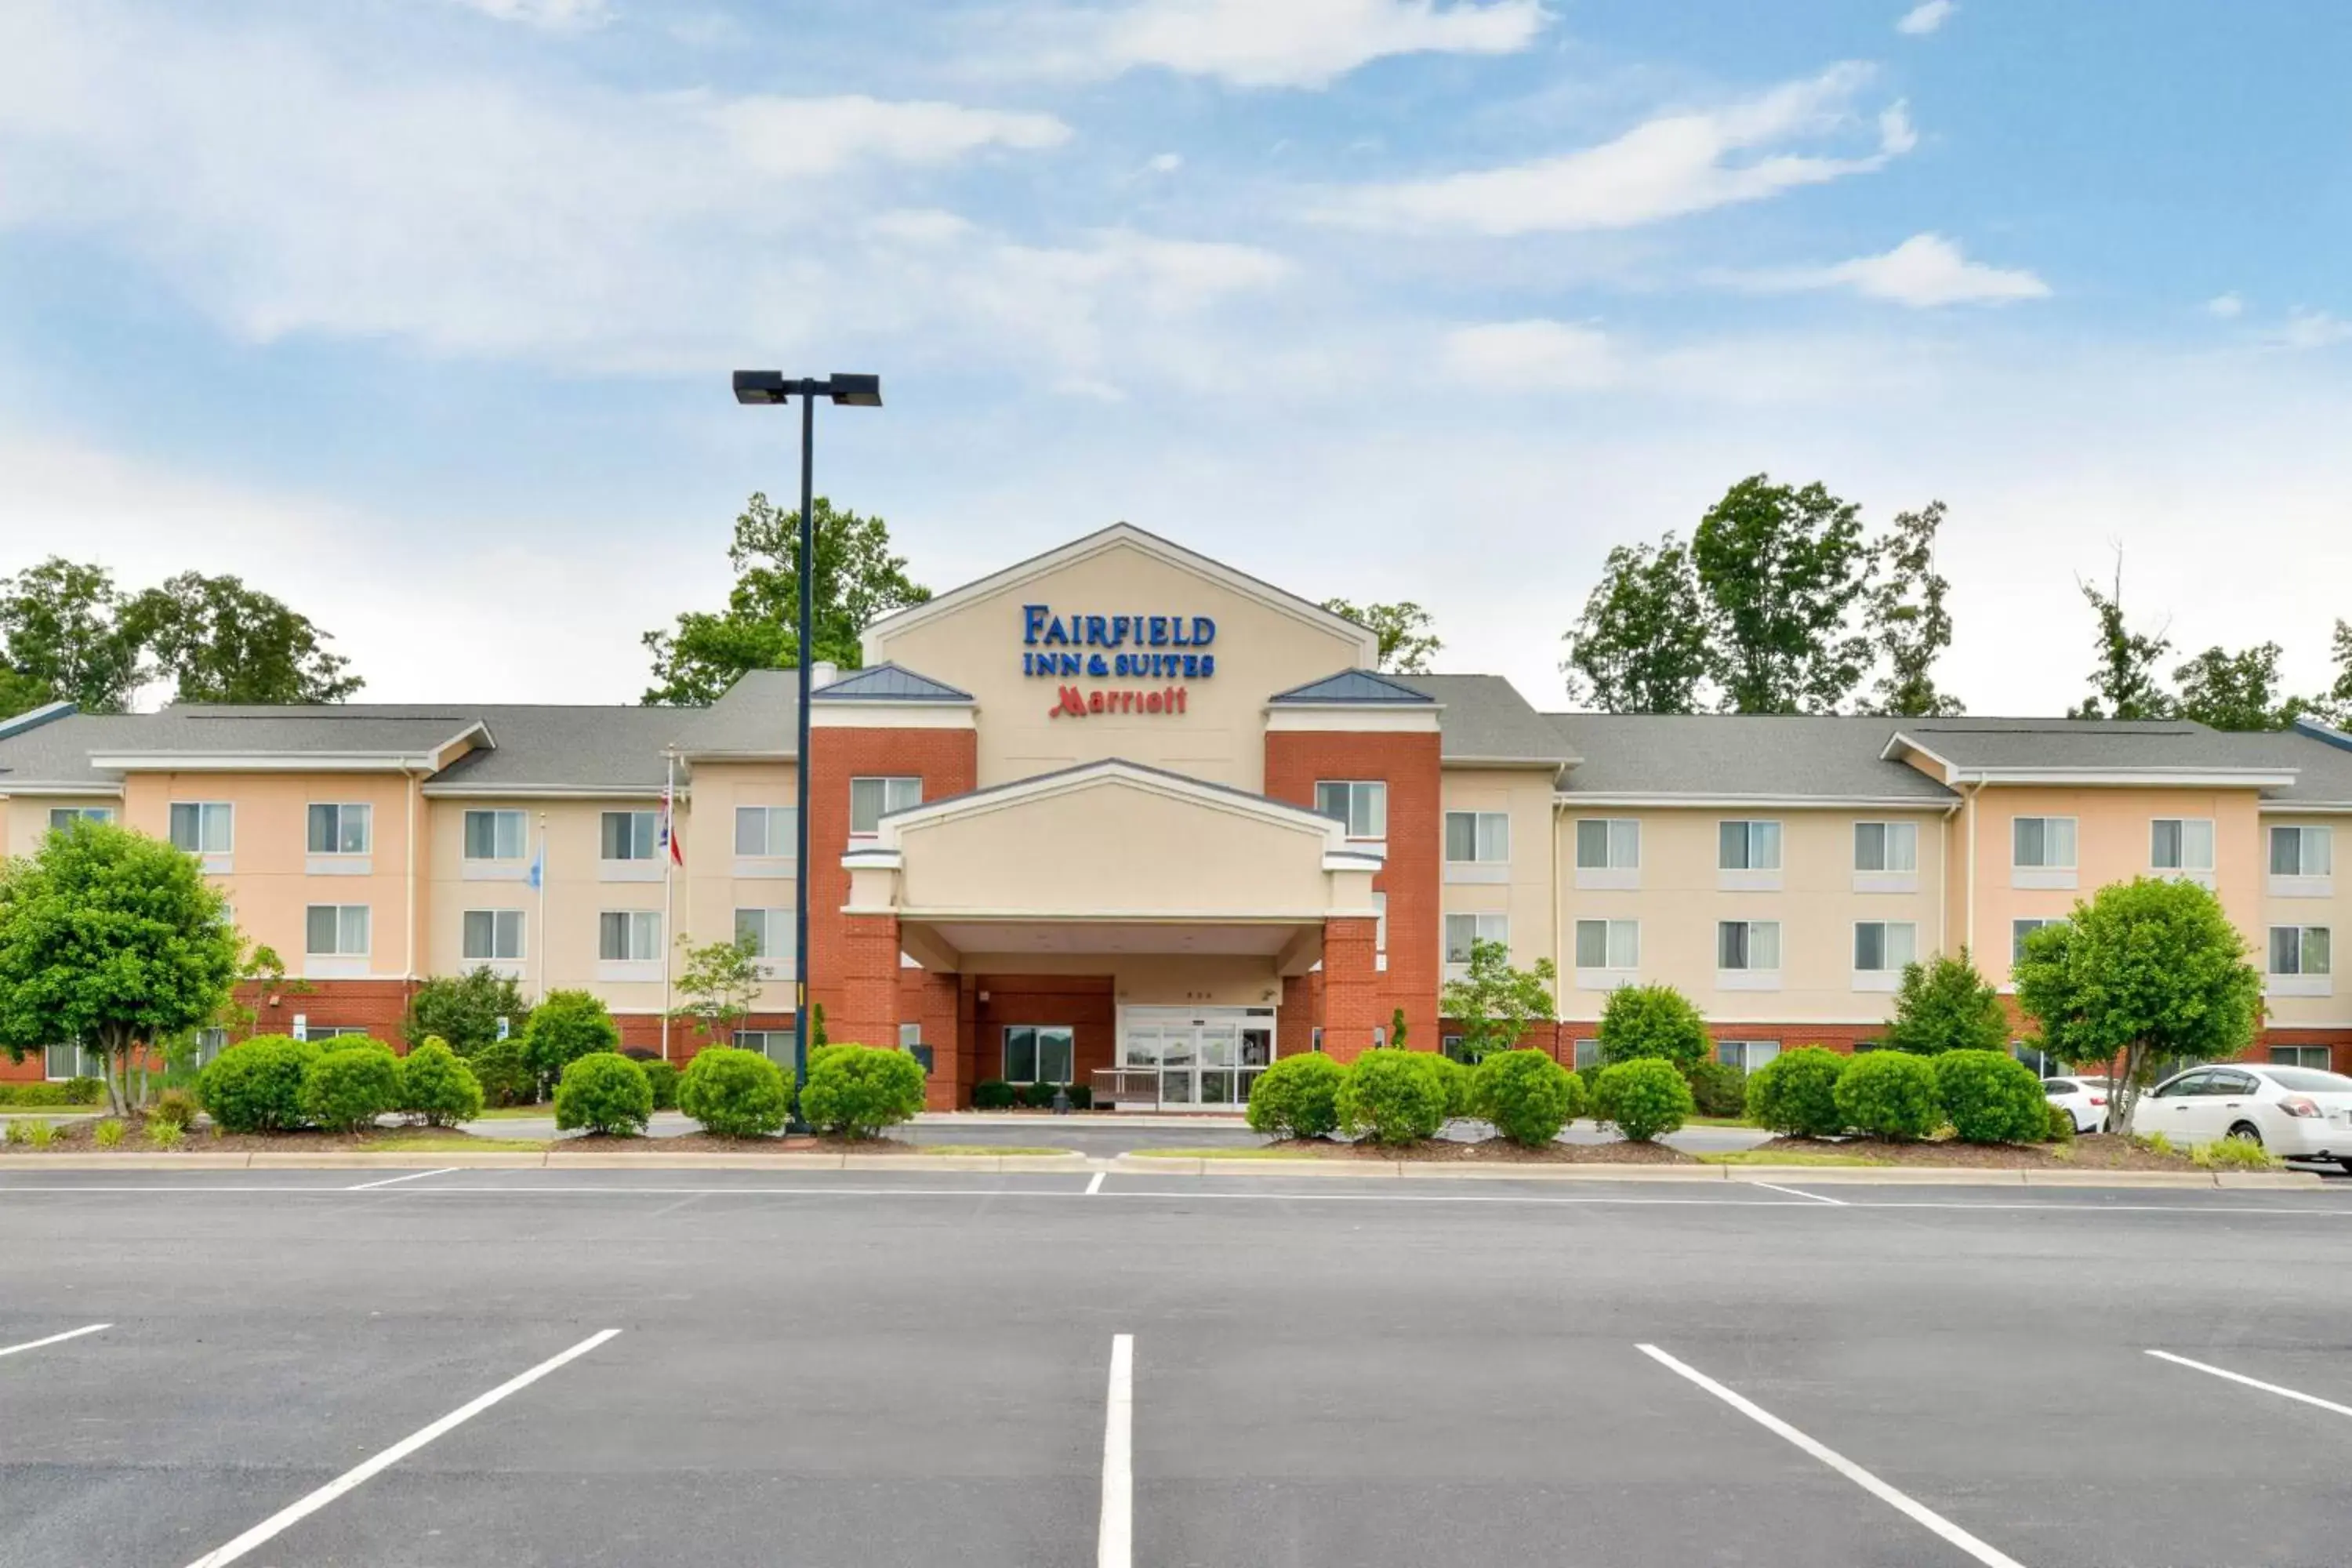 Property Building in Fairfield Inn and Suites by Marriott Asheboro